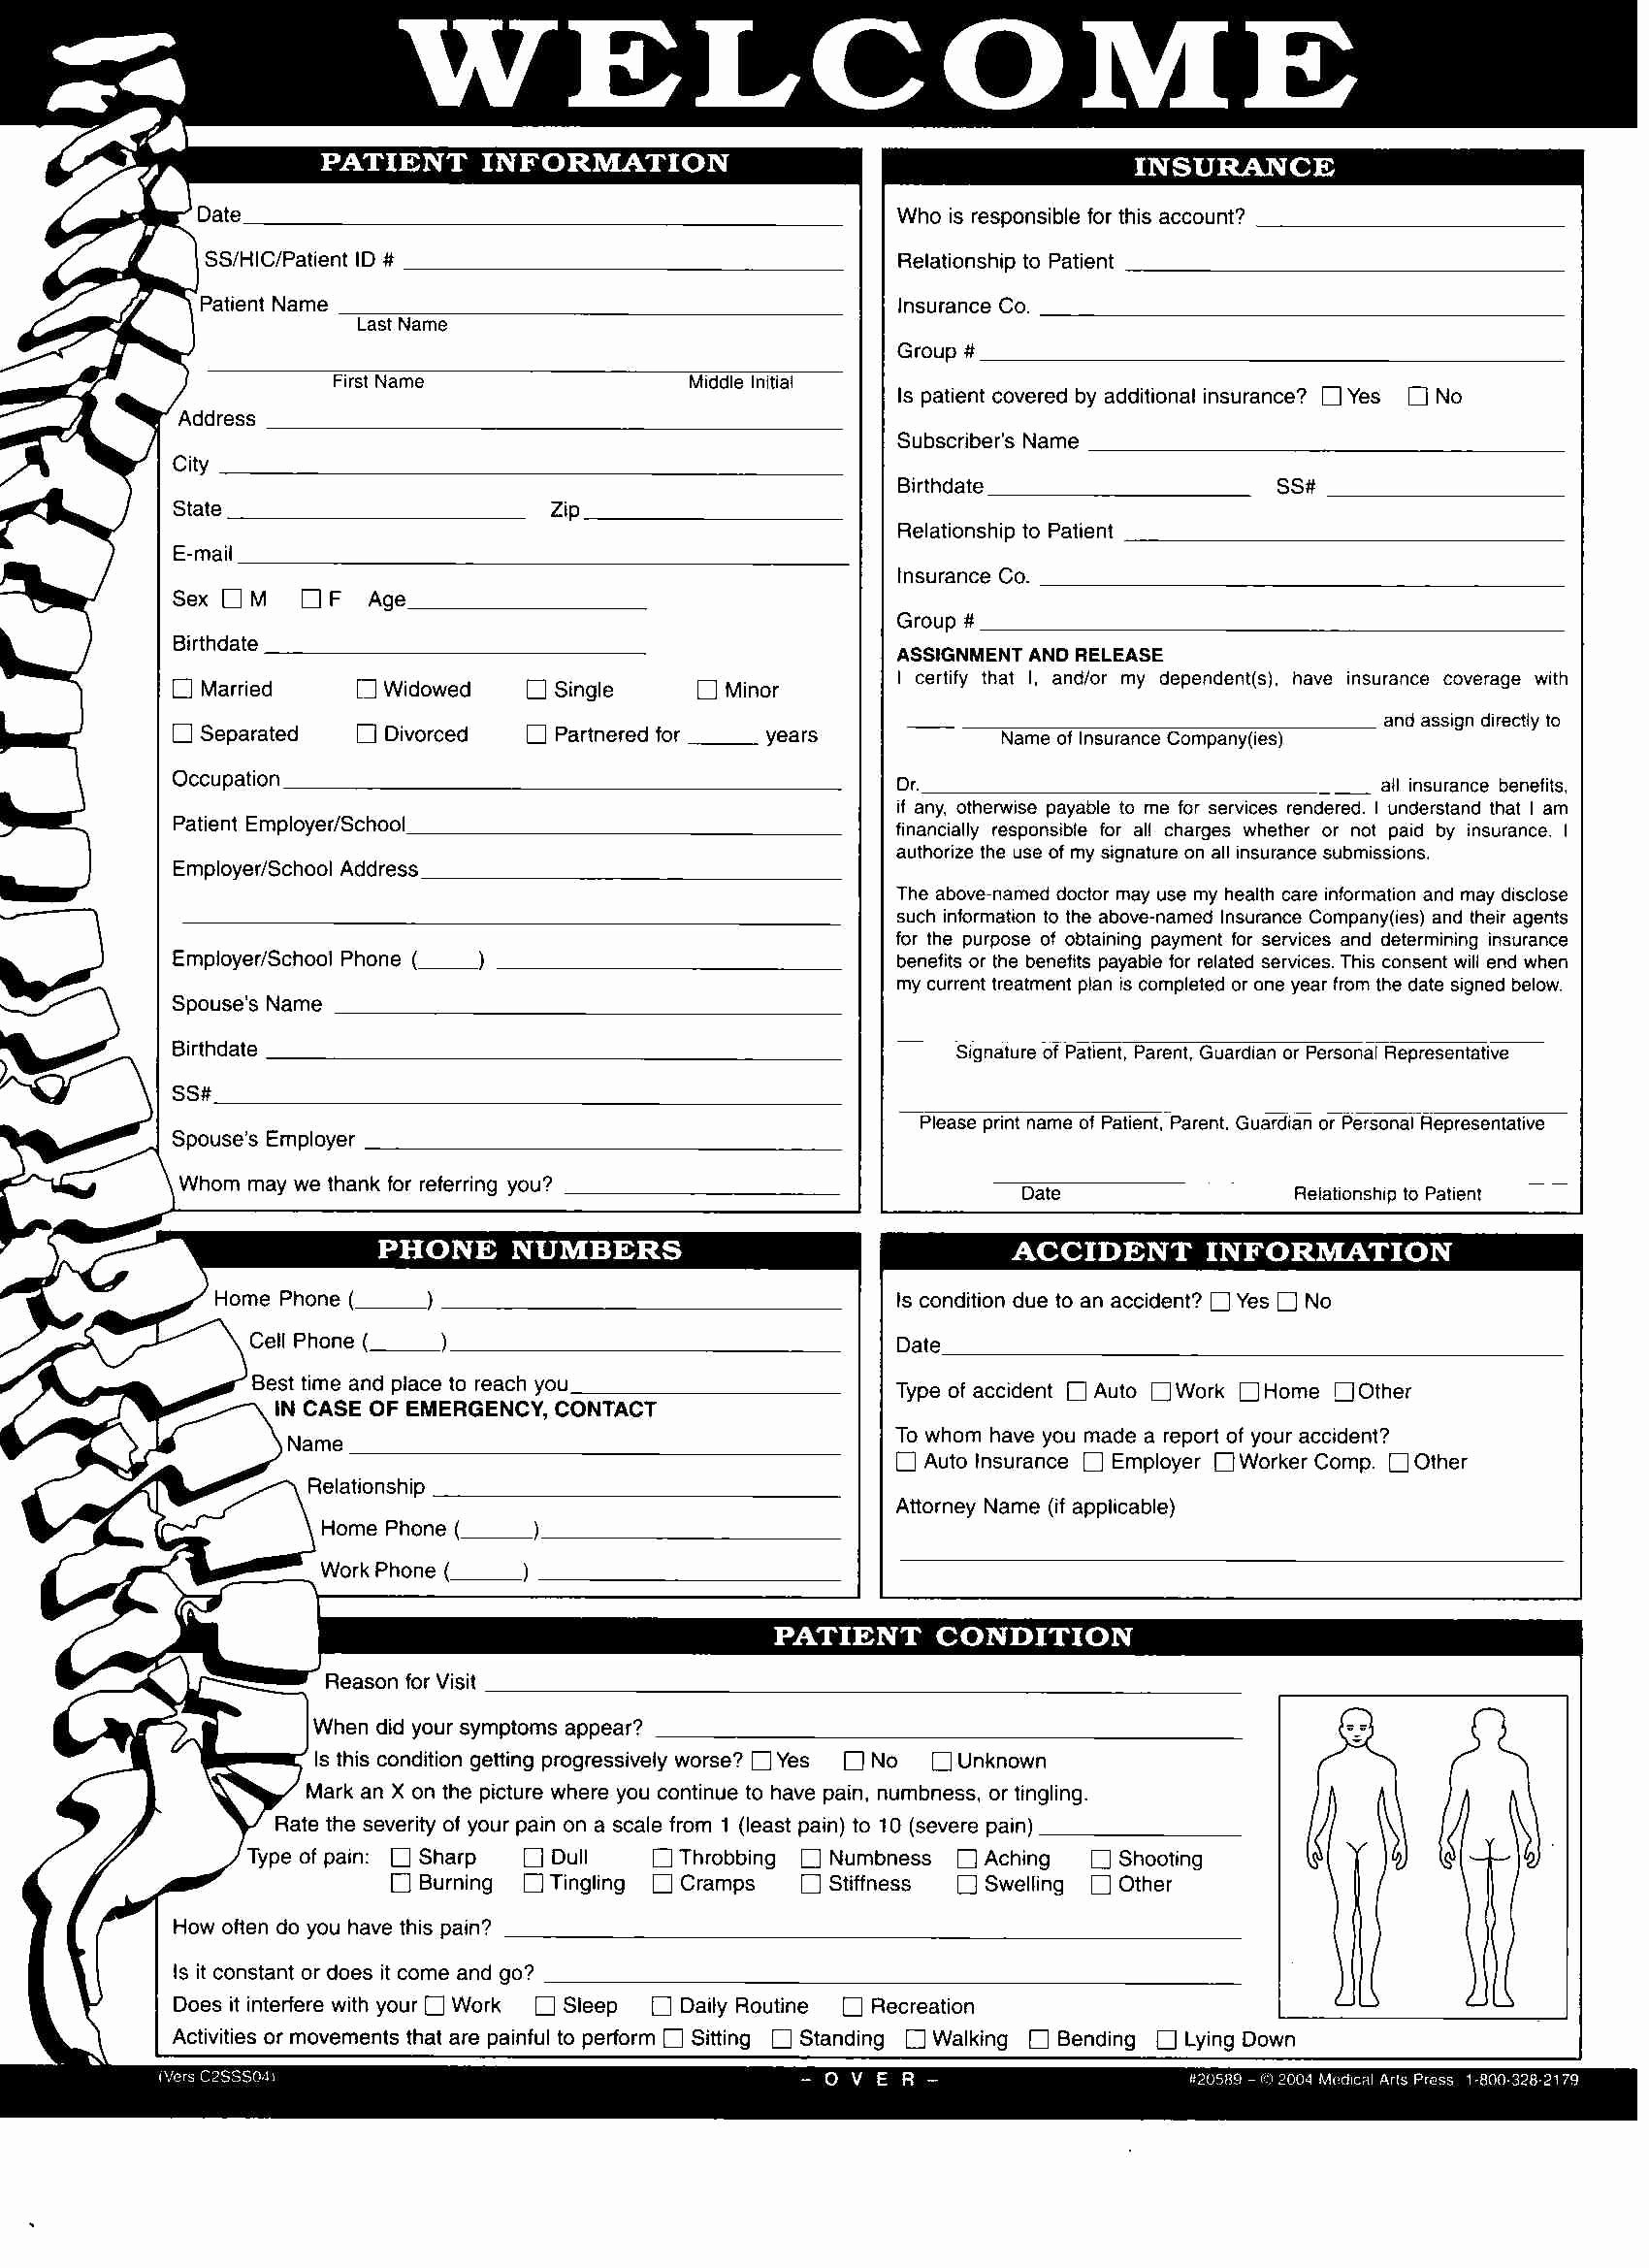 Patient Face Sheet Template Elegant 23 Of Chiropractic Exam forms Template